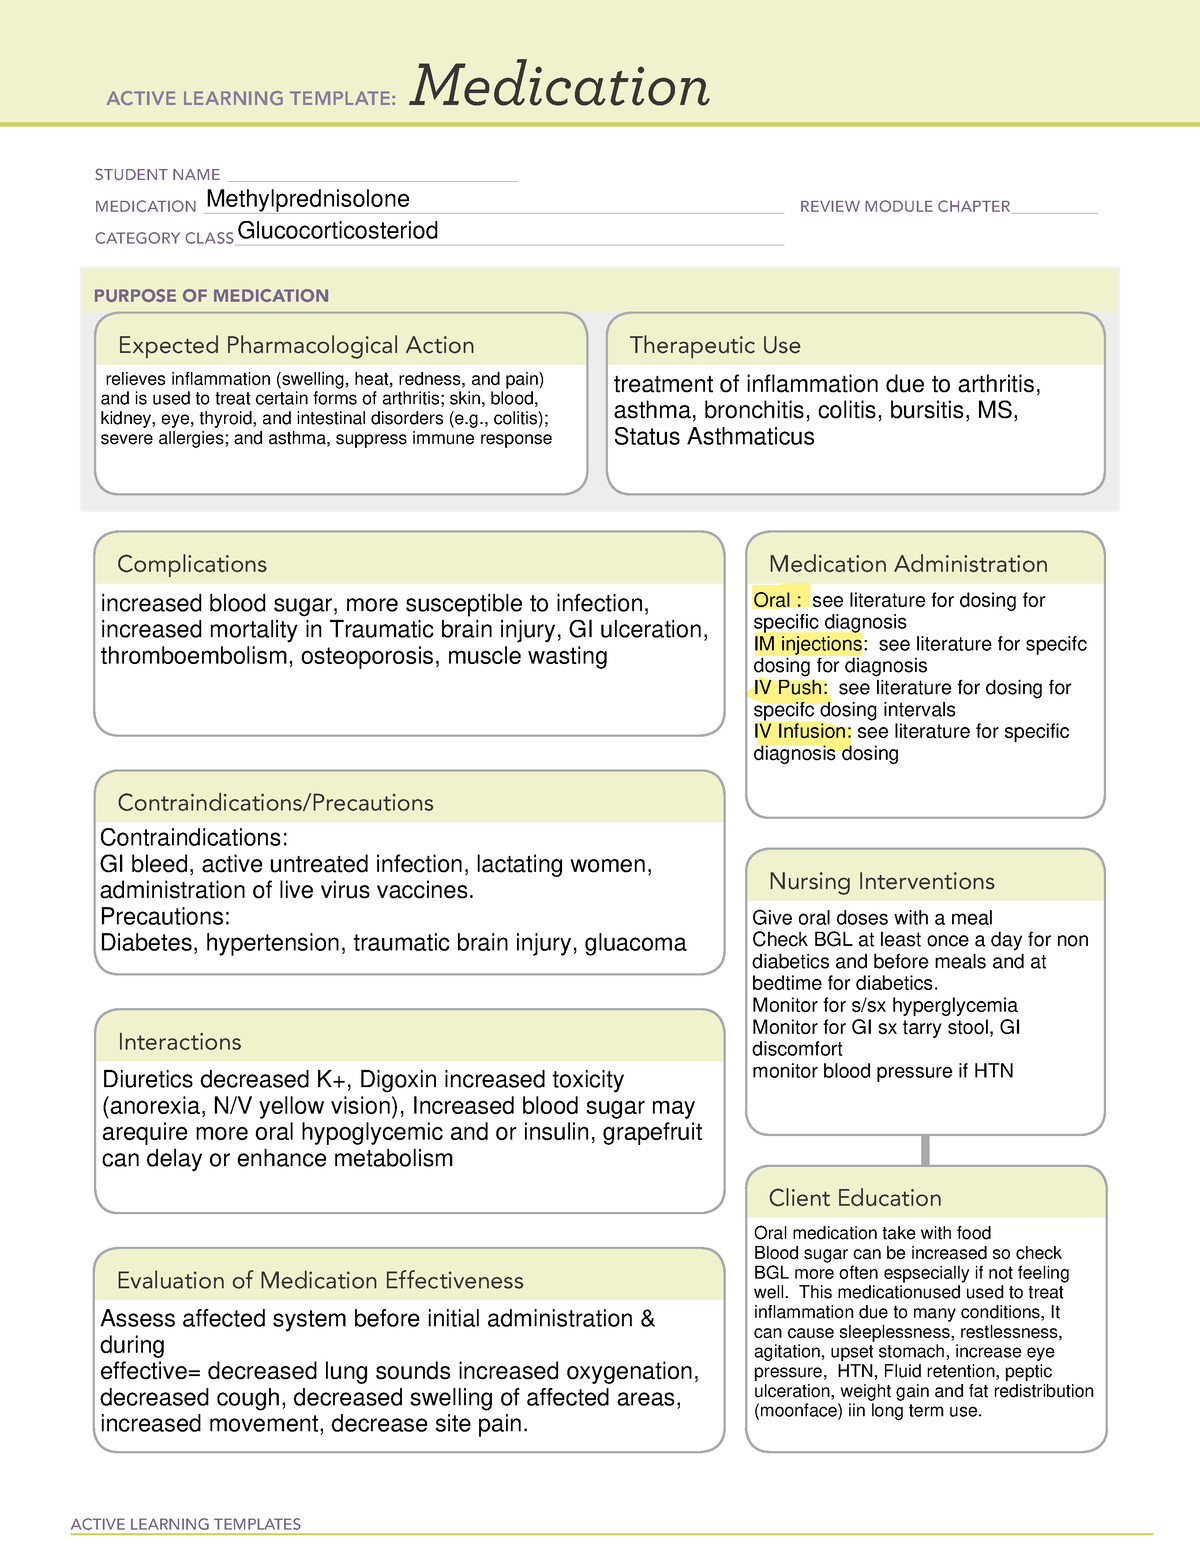 Methylprednisolone ATI medication template ACTIVE LEARNING TEMPLATES